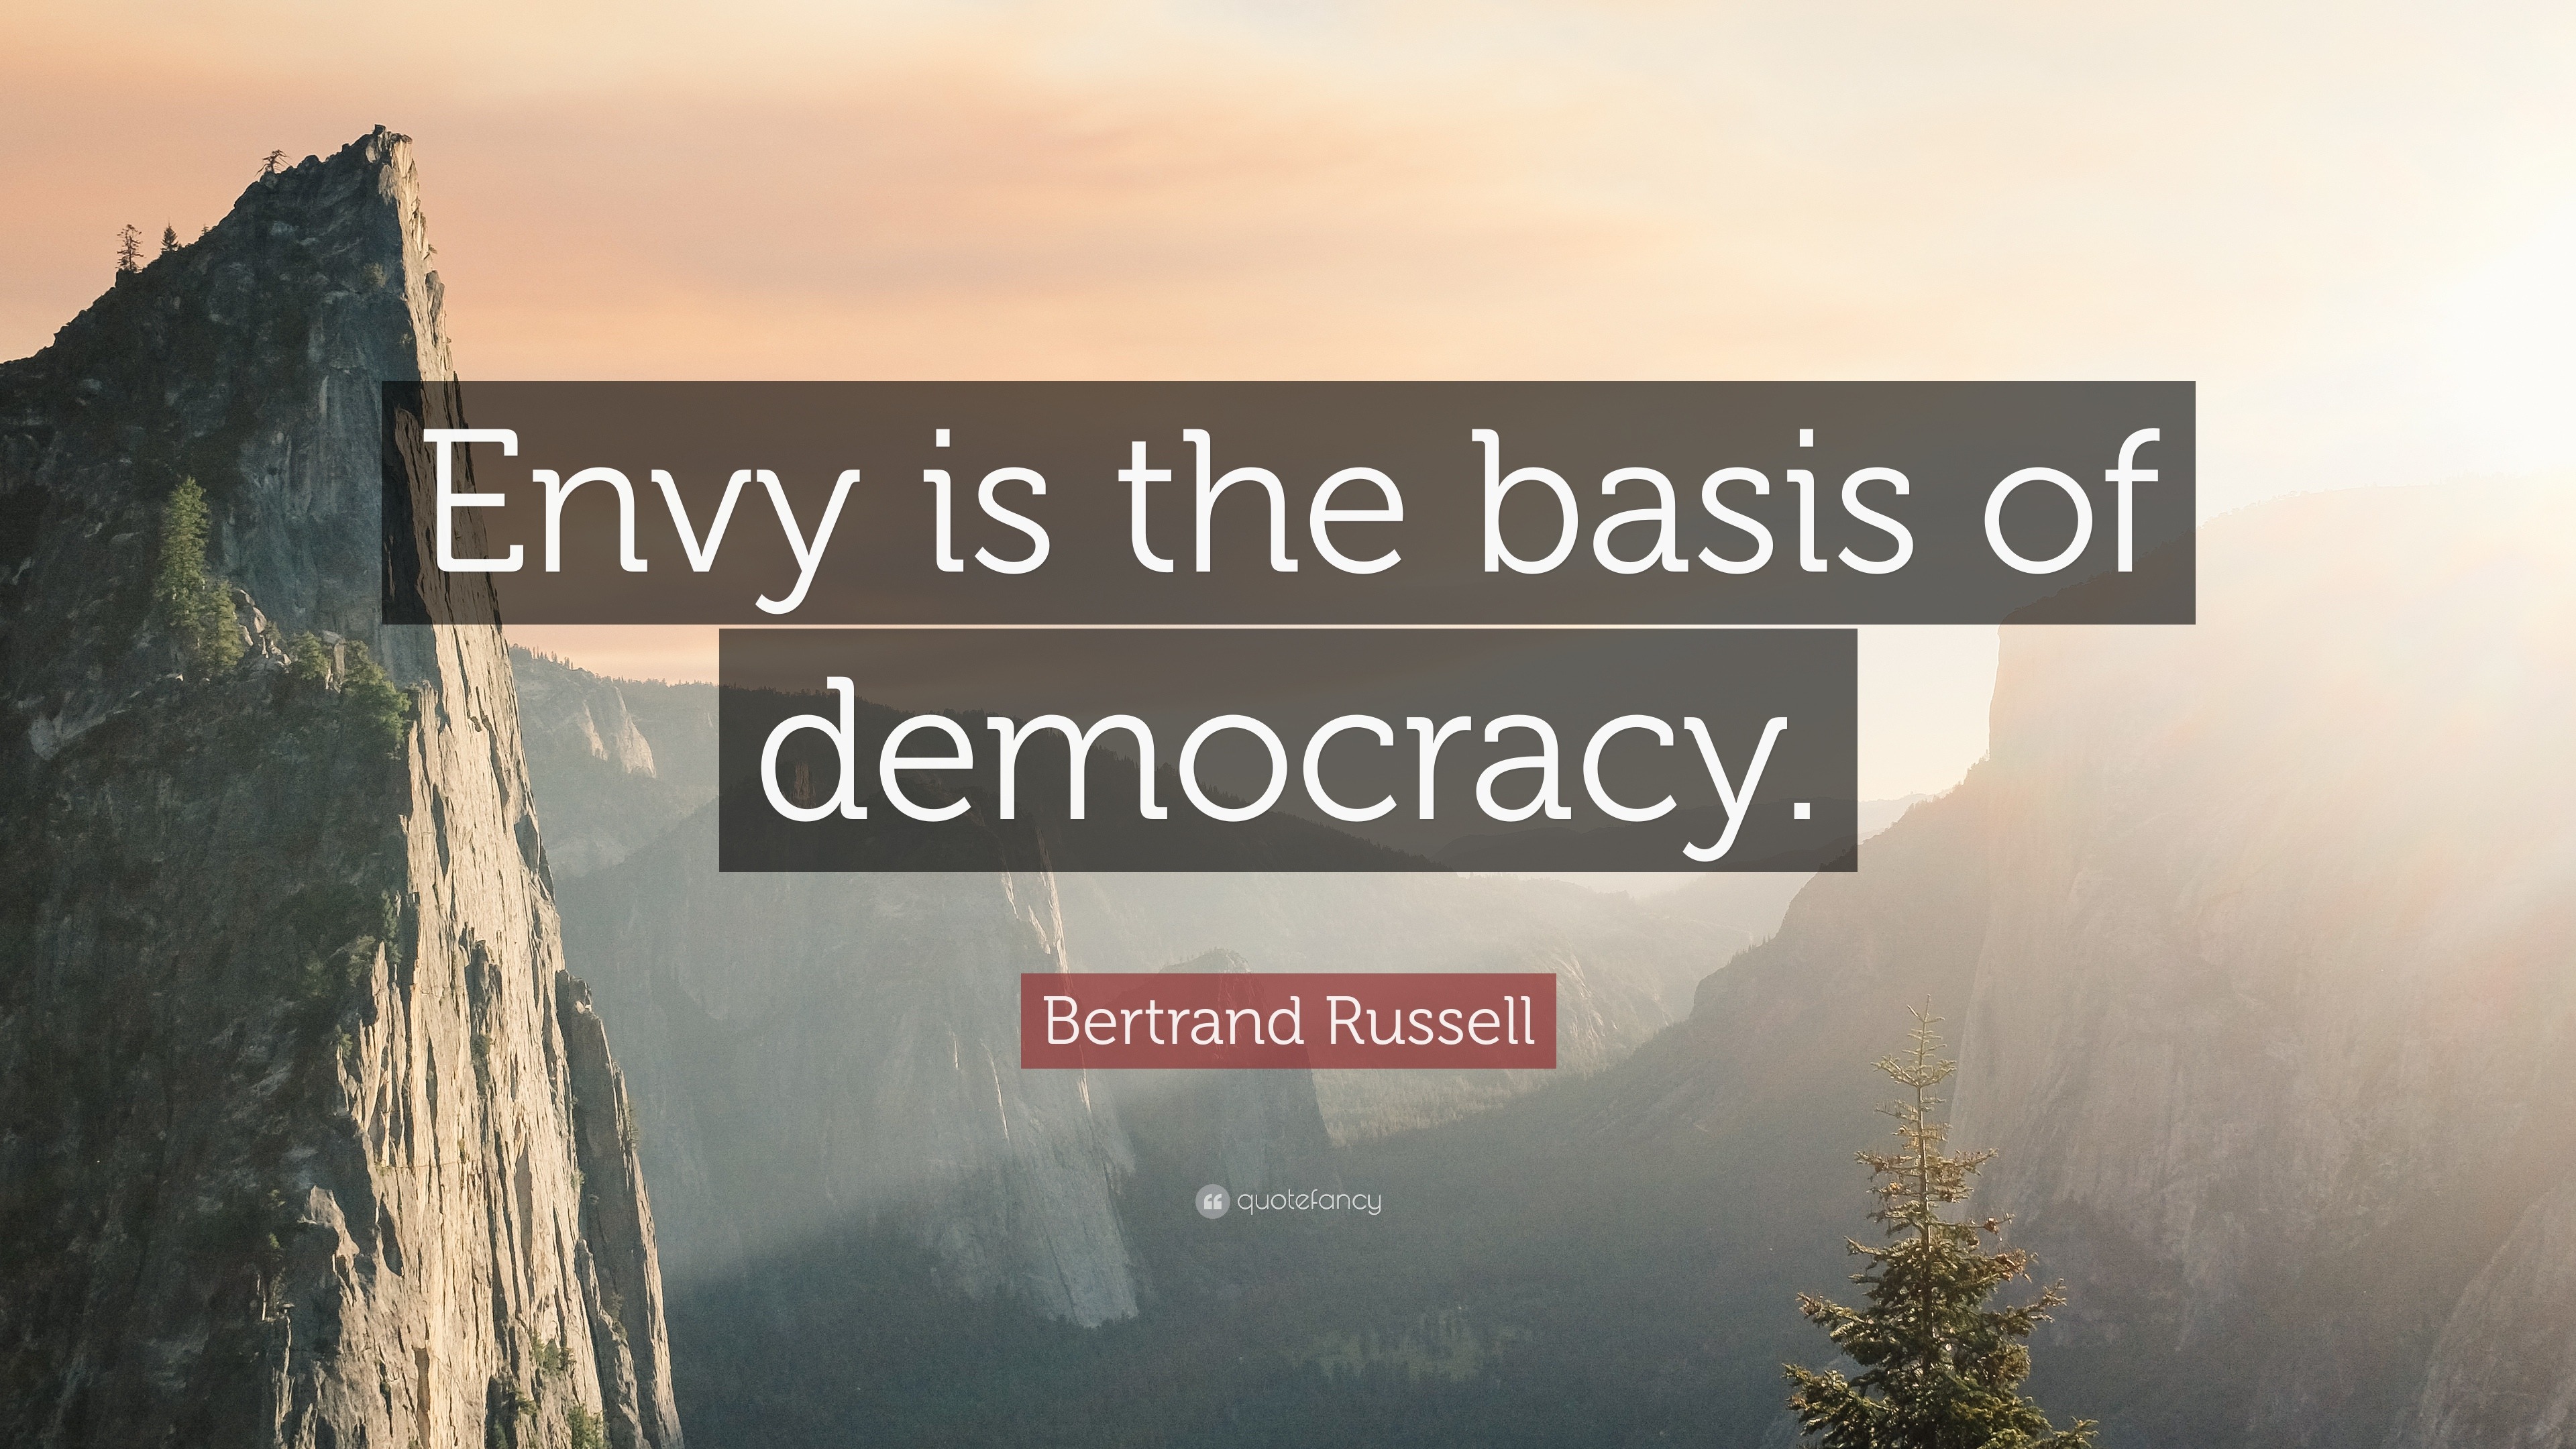 Bertrand Russell Quote “Envy is the basis of democracy ”